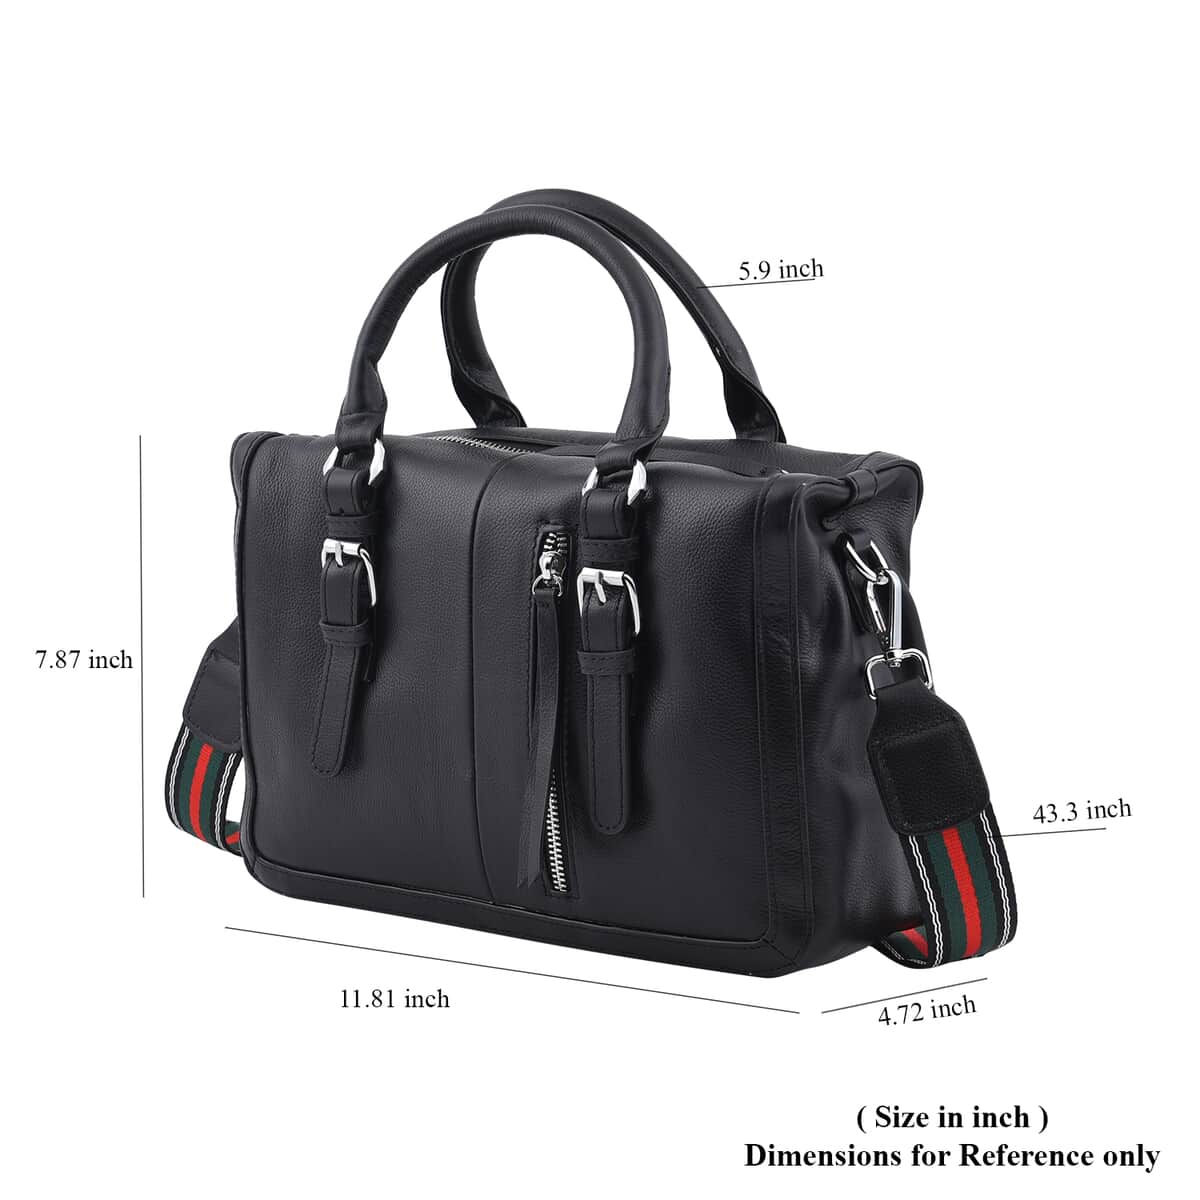 Black Genuine Leather Tote Bag (11.81"X4.72"X7.87") with Top Double Handles and Shoulder Strap image number 6